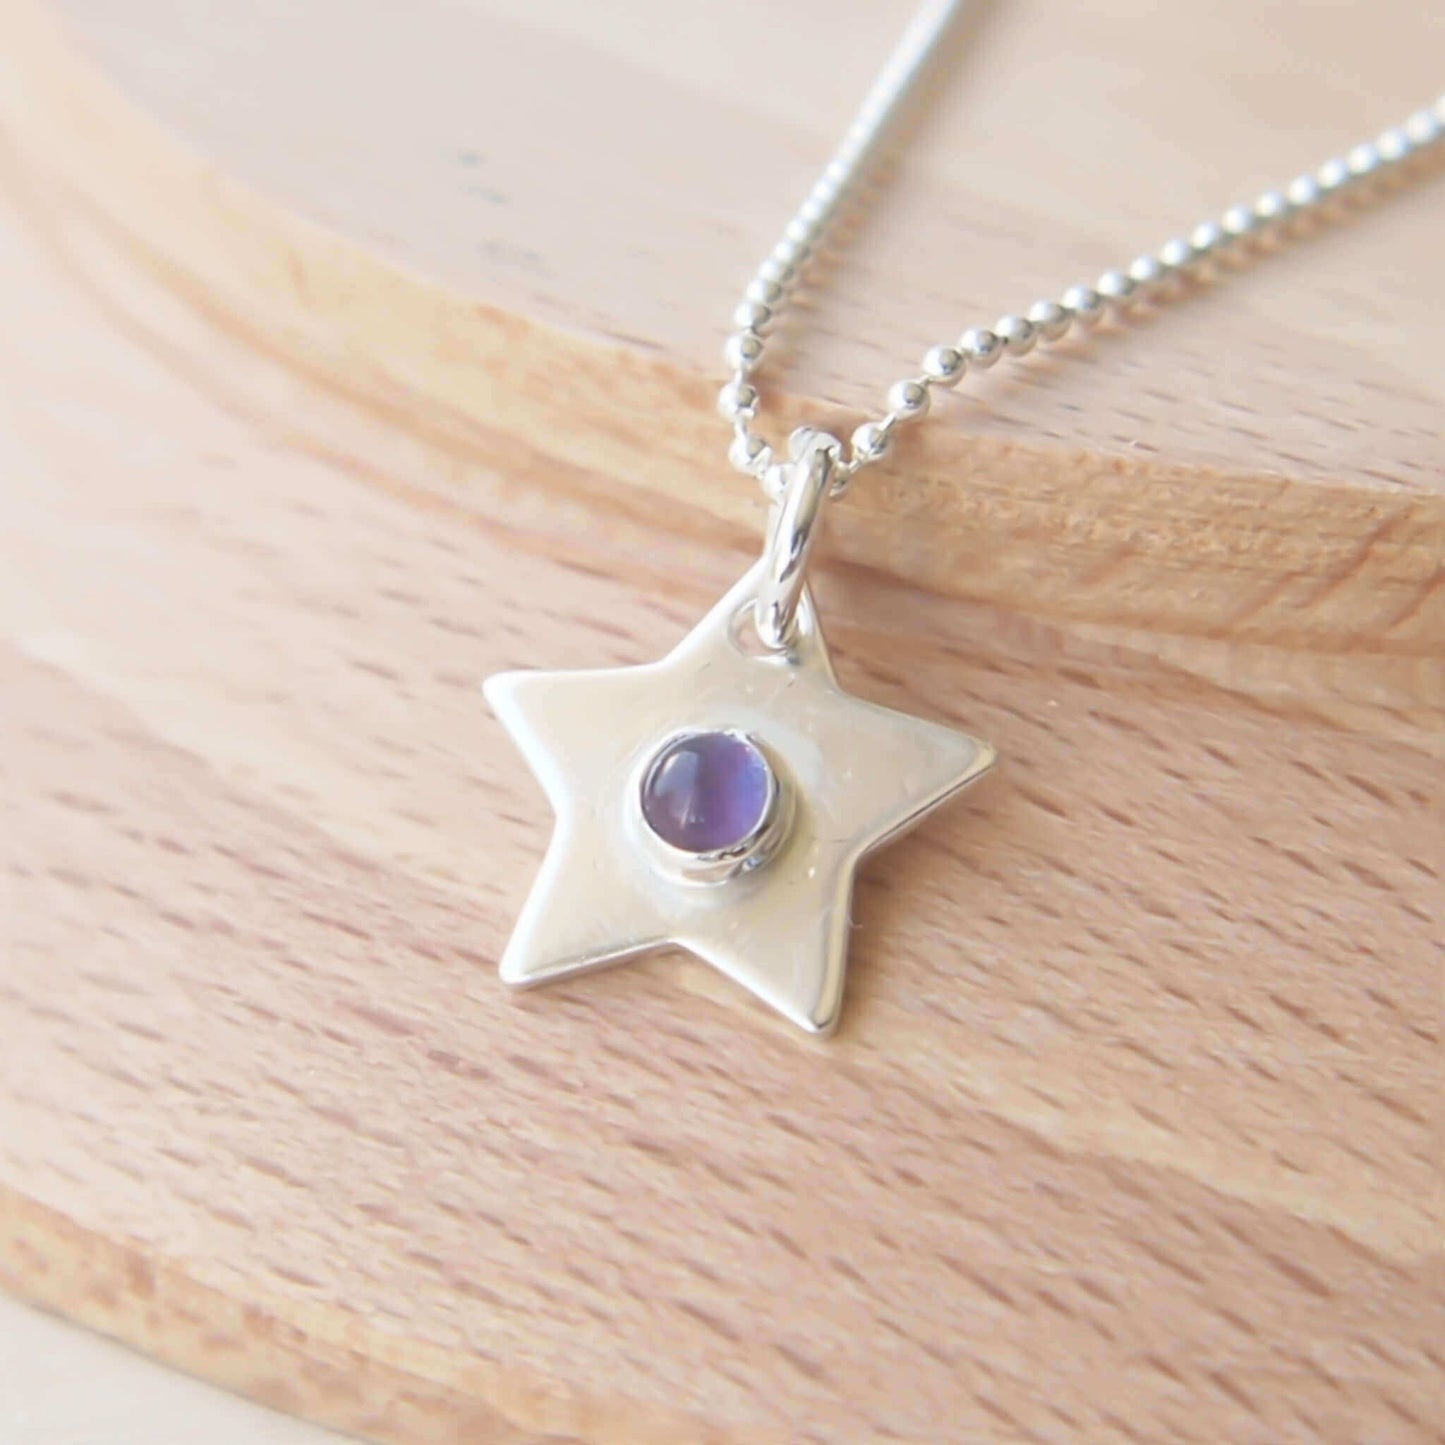 Simple silver star pendant with February Birthstone Amethyst which is a purple gemstone. The pendant is made from Sterling Silver and is handmade by maram jewellery in Scotland UK